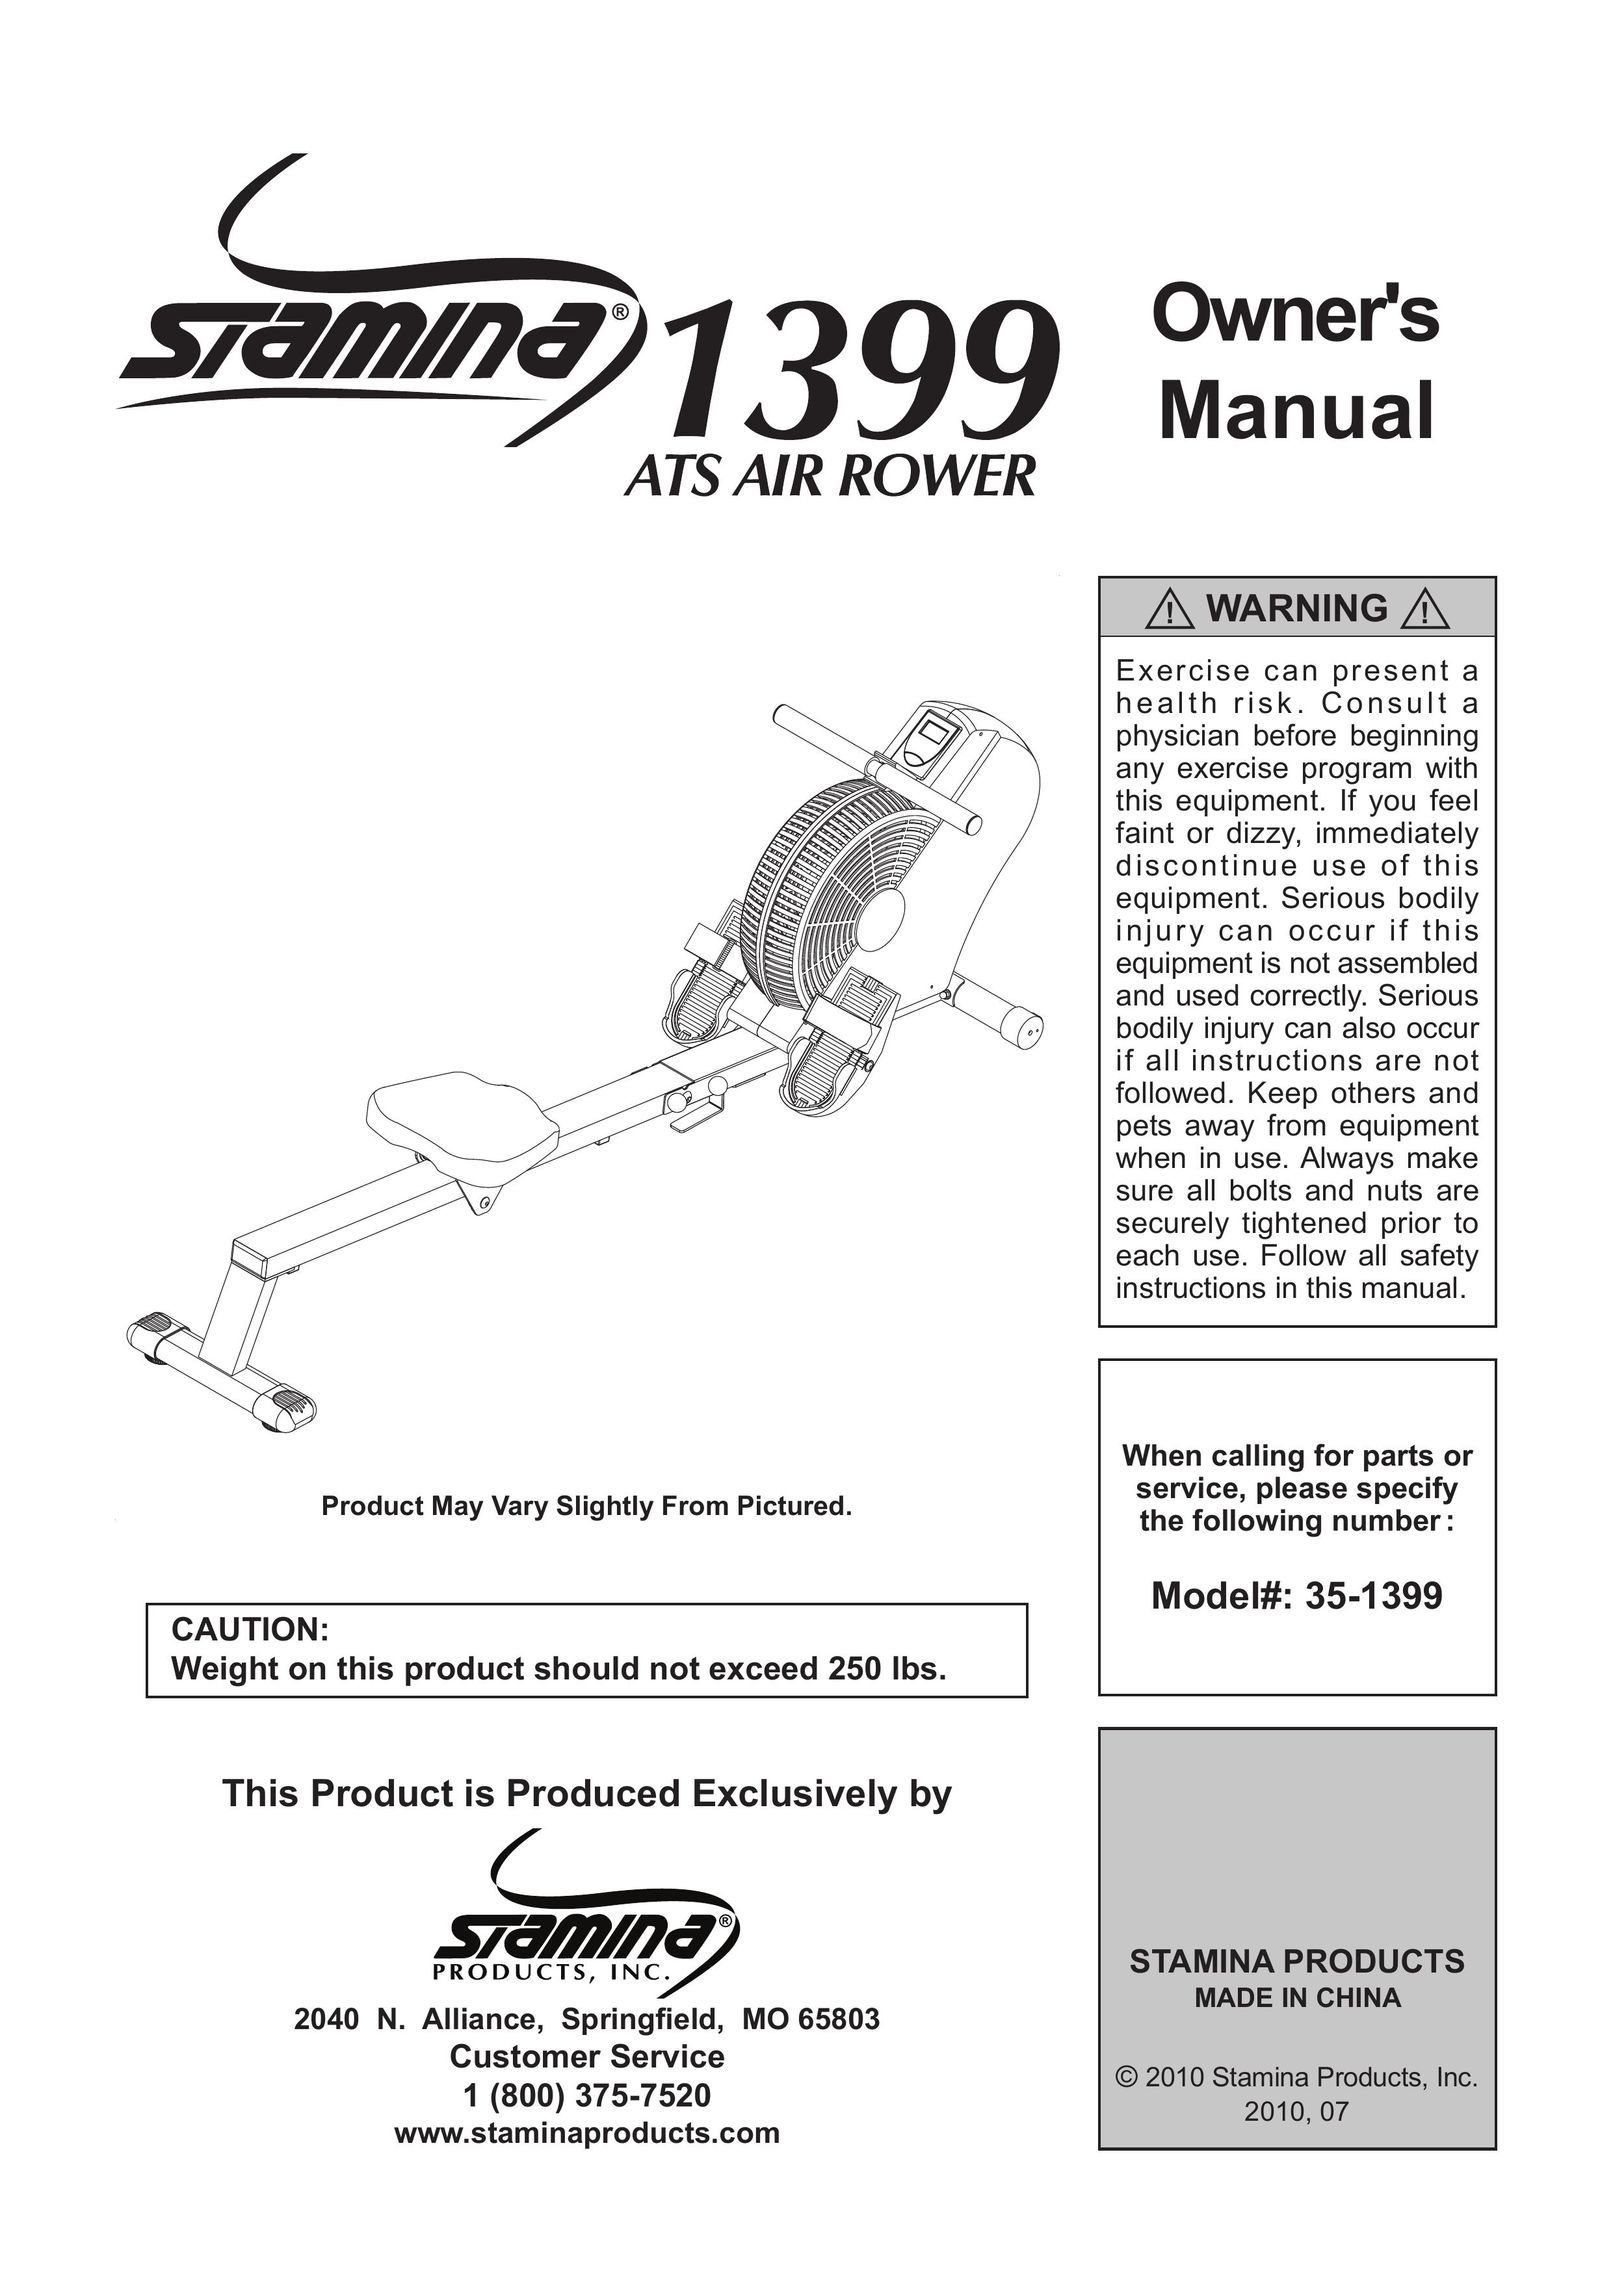 Stamina Products 35-1399 Rowing Machine User Manual